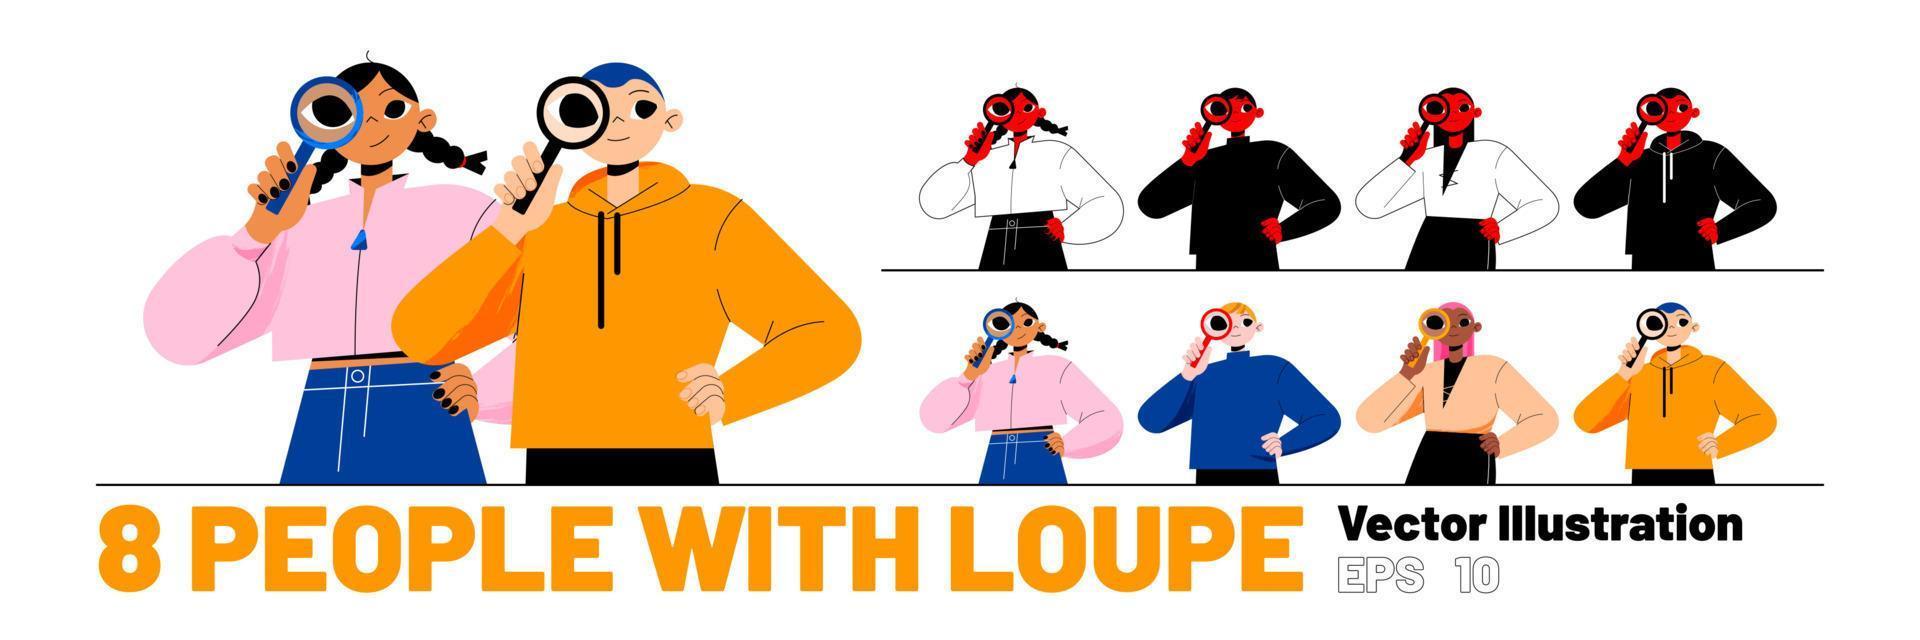 Set of people with loupe, characters with glasses vector